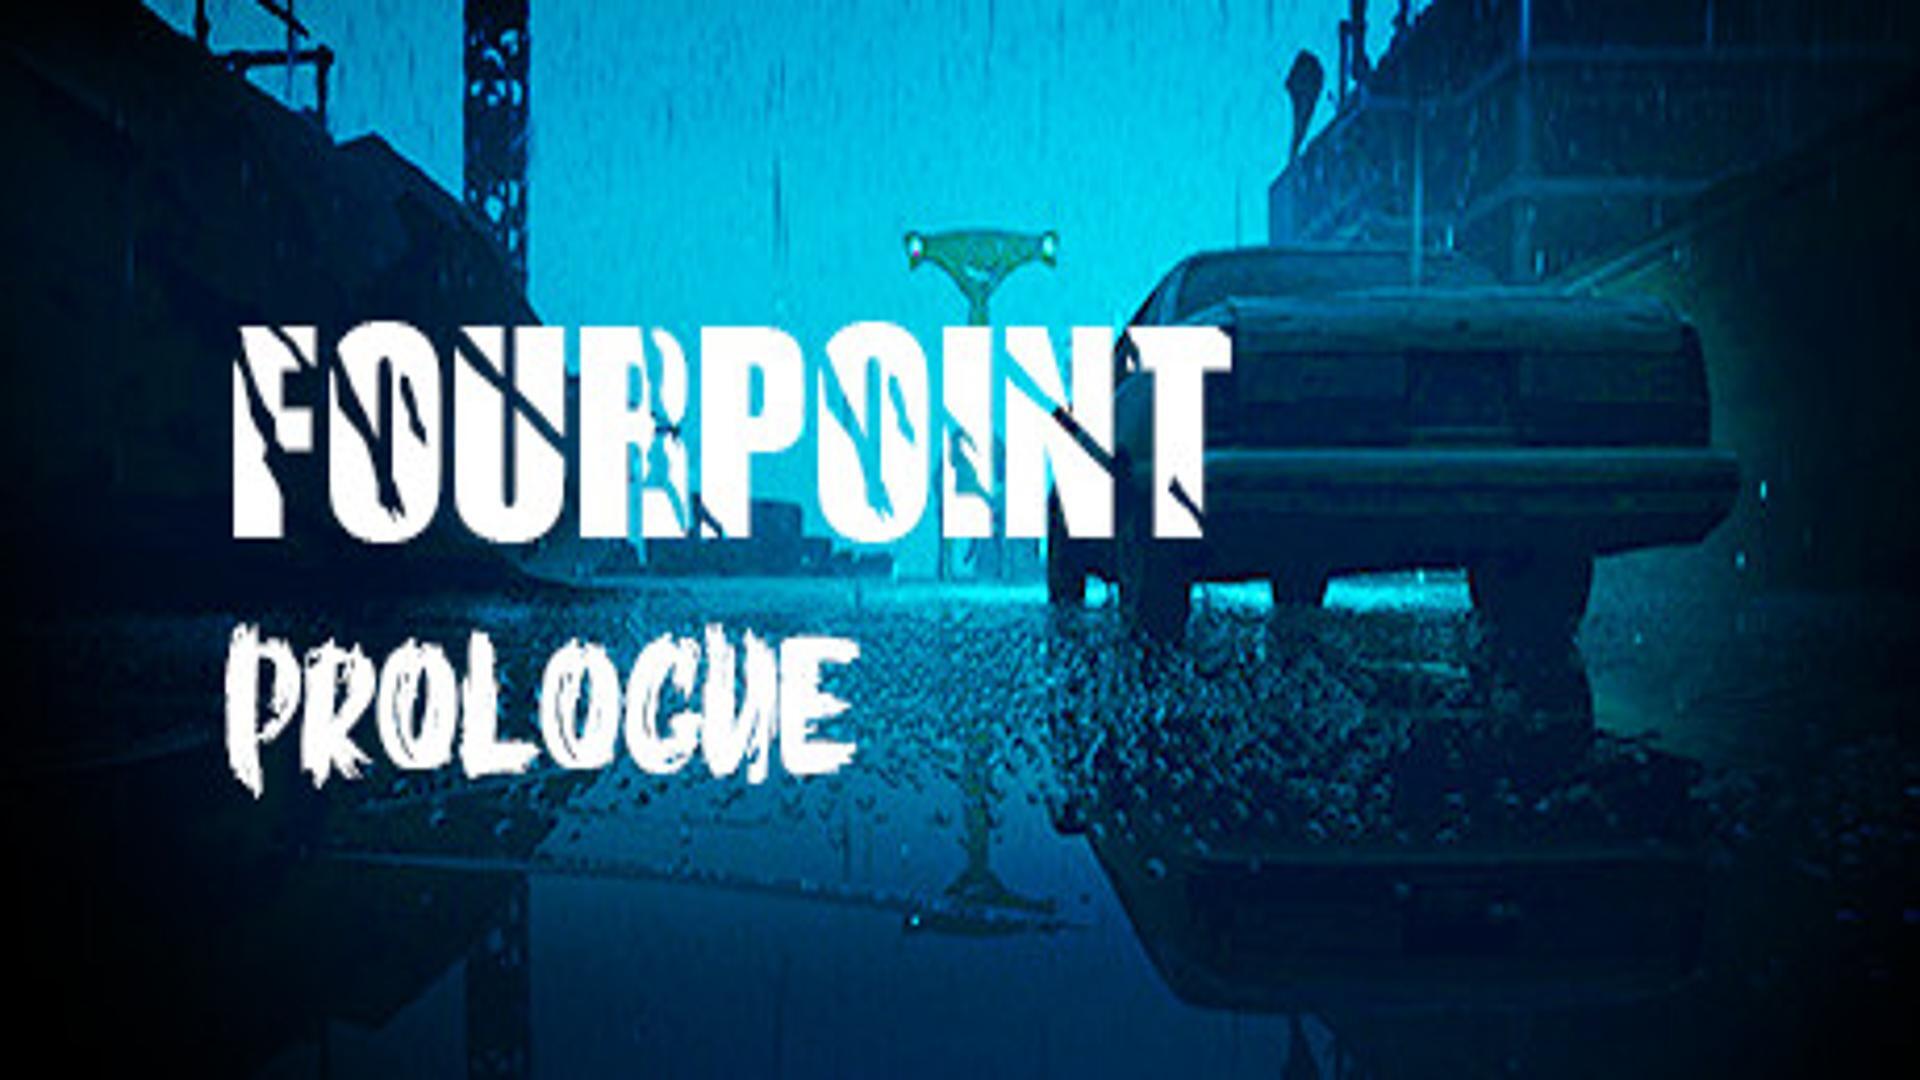 FourPoint:prologue- Free Download (Build 13793388)